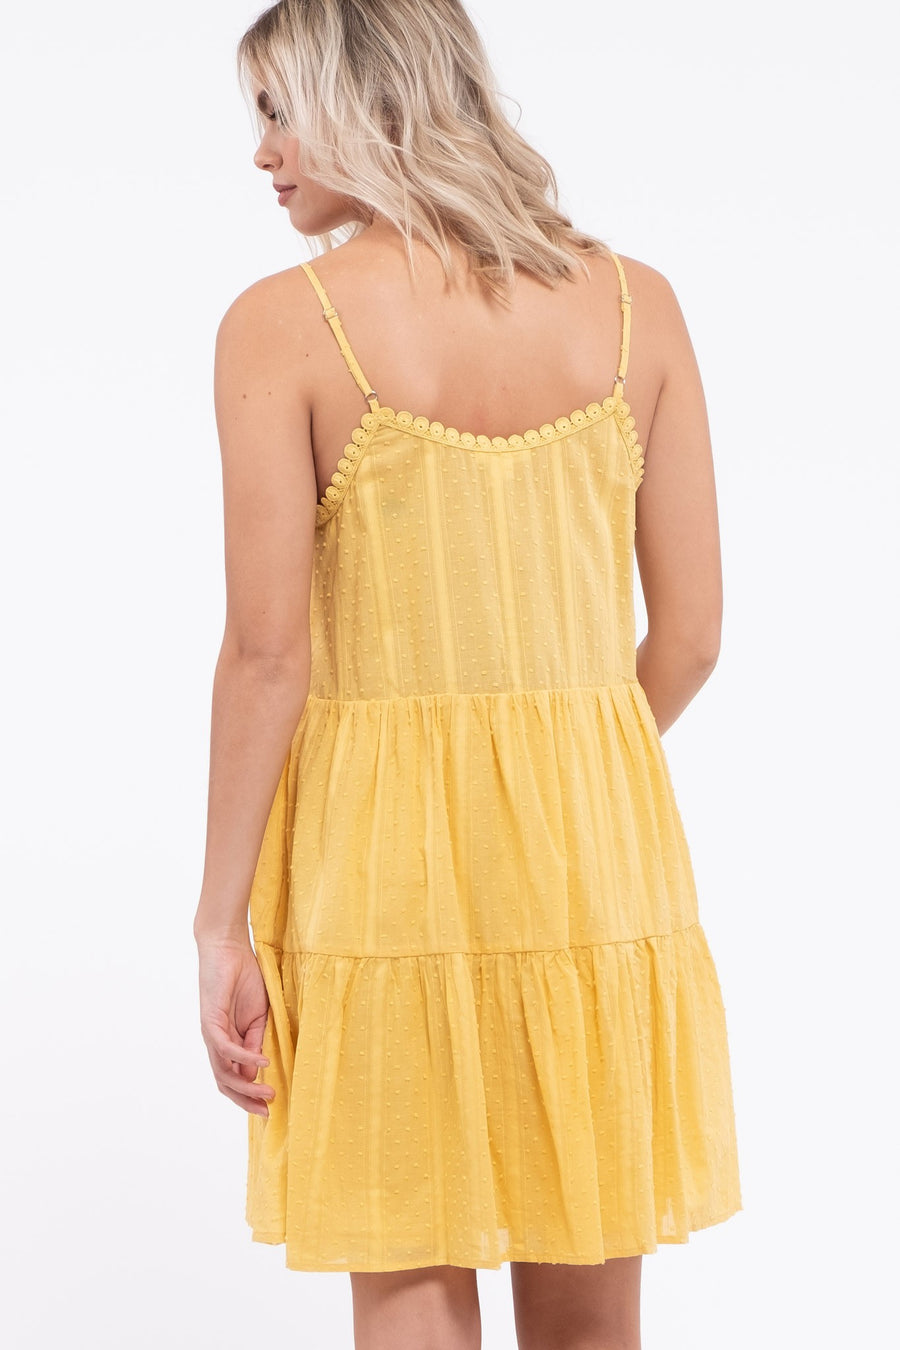 The Lia Dotted Lace Sun Dress